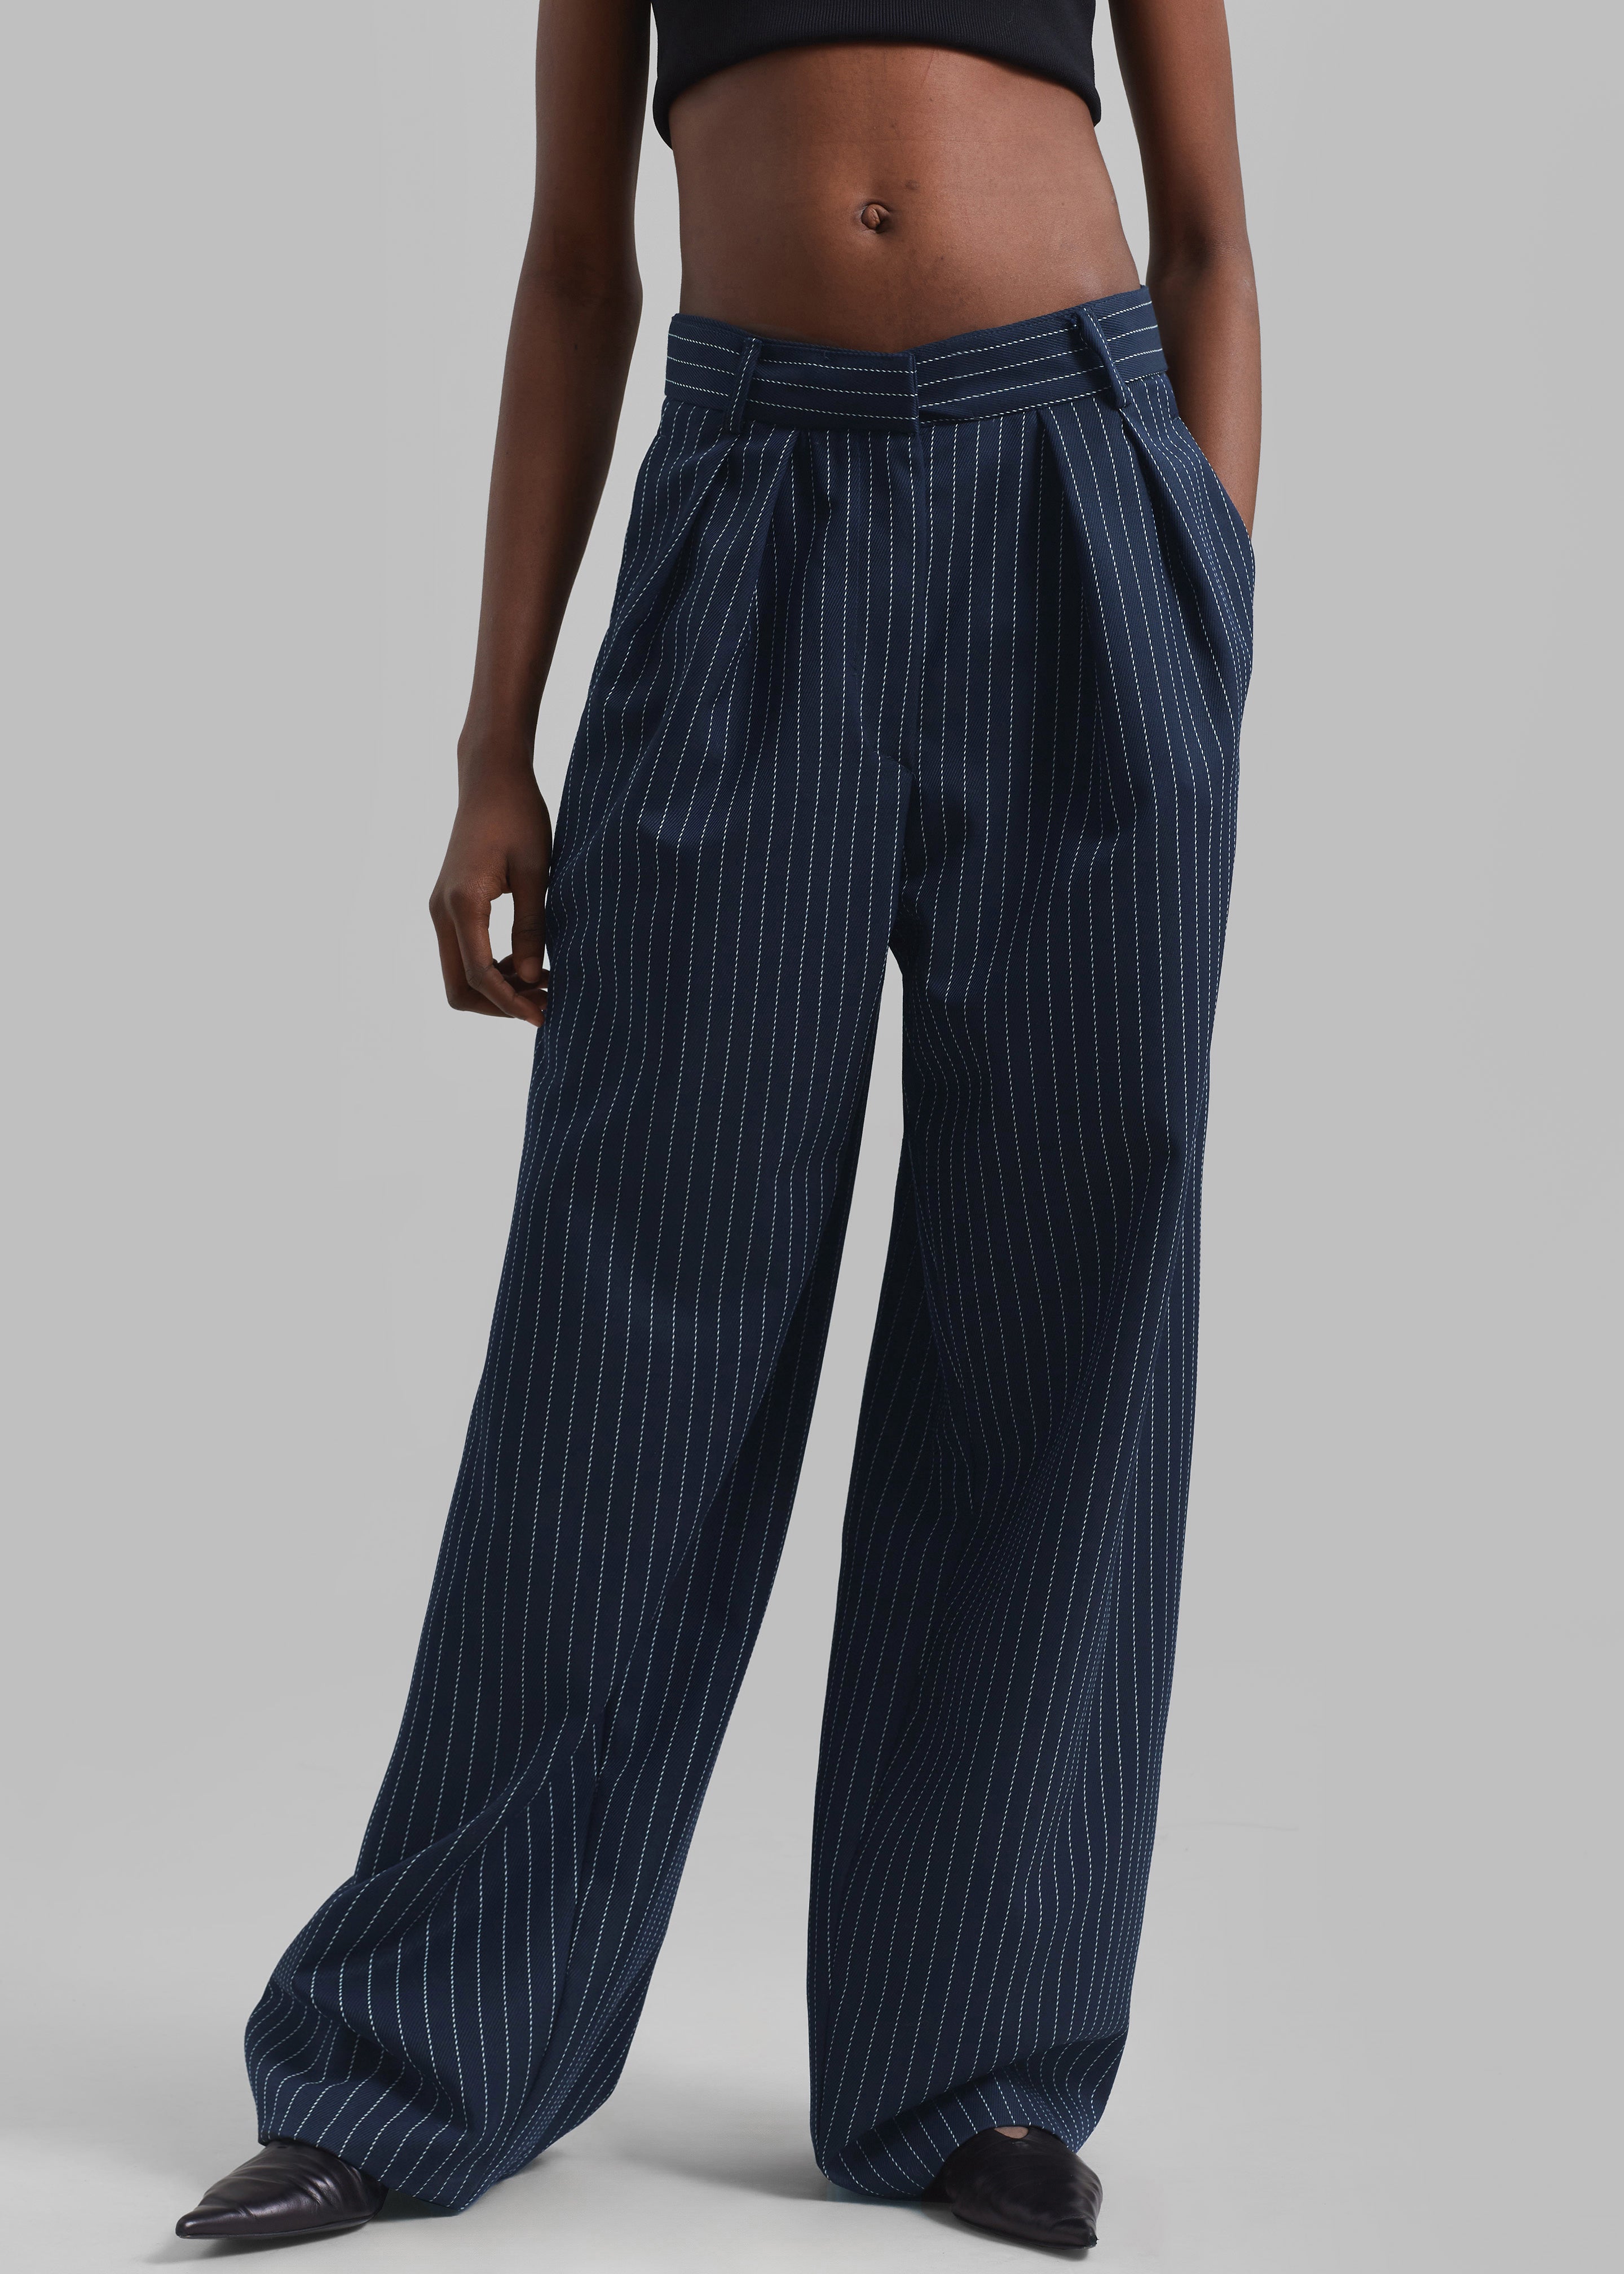 Ripley Pleated Twill Trousers - Navy/White Pinstripe - 2